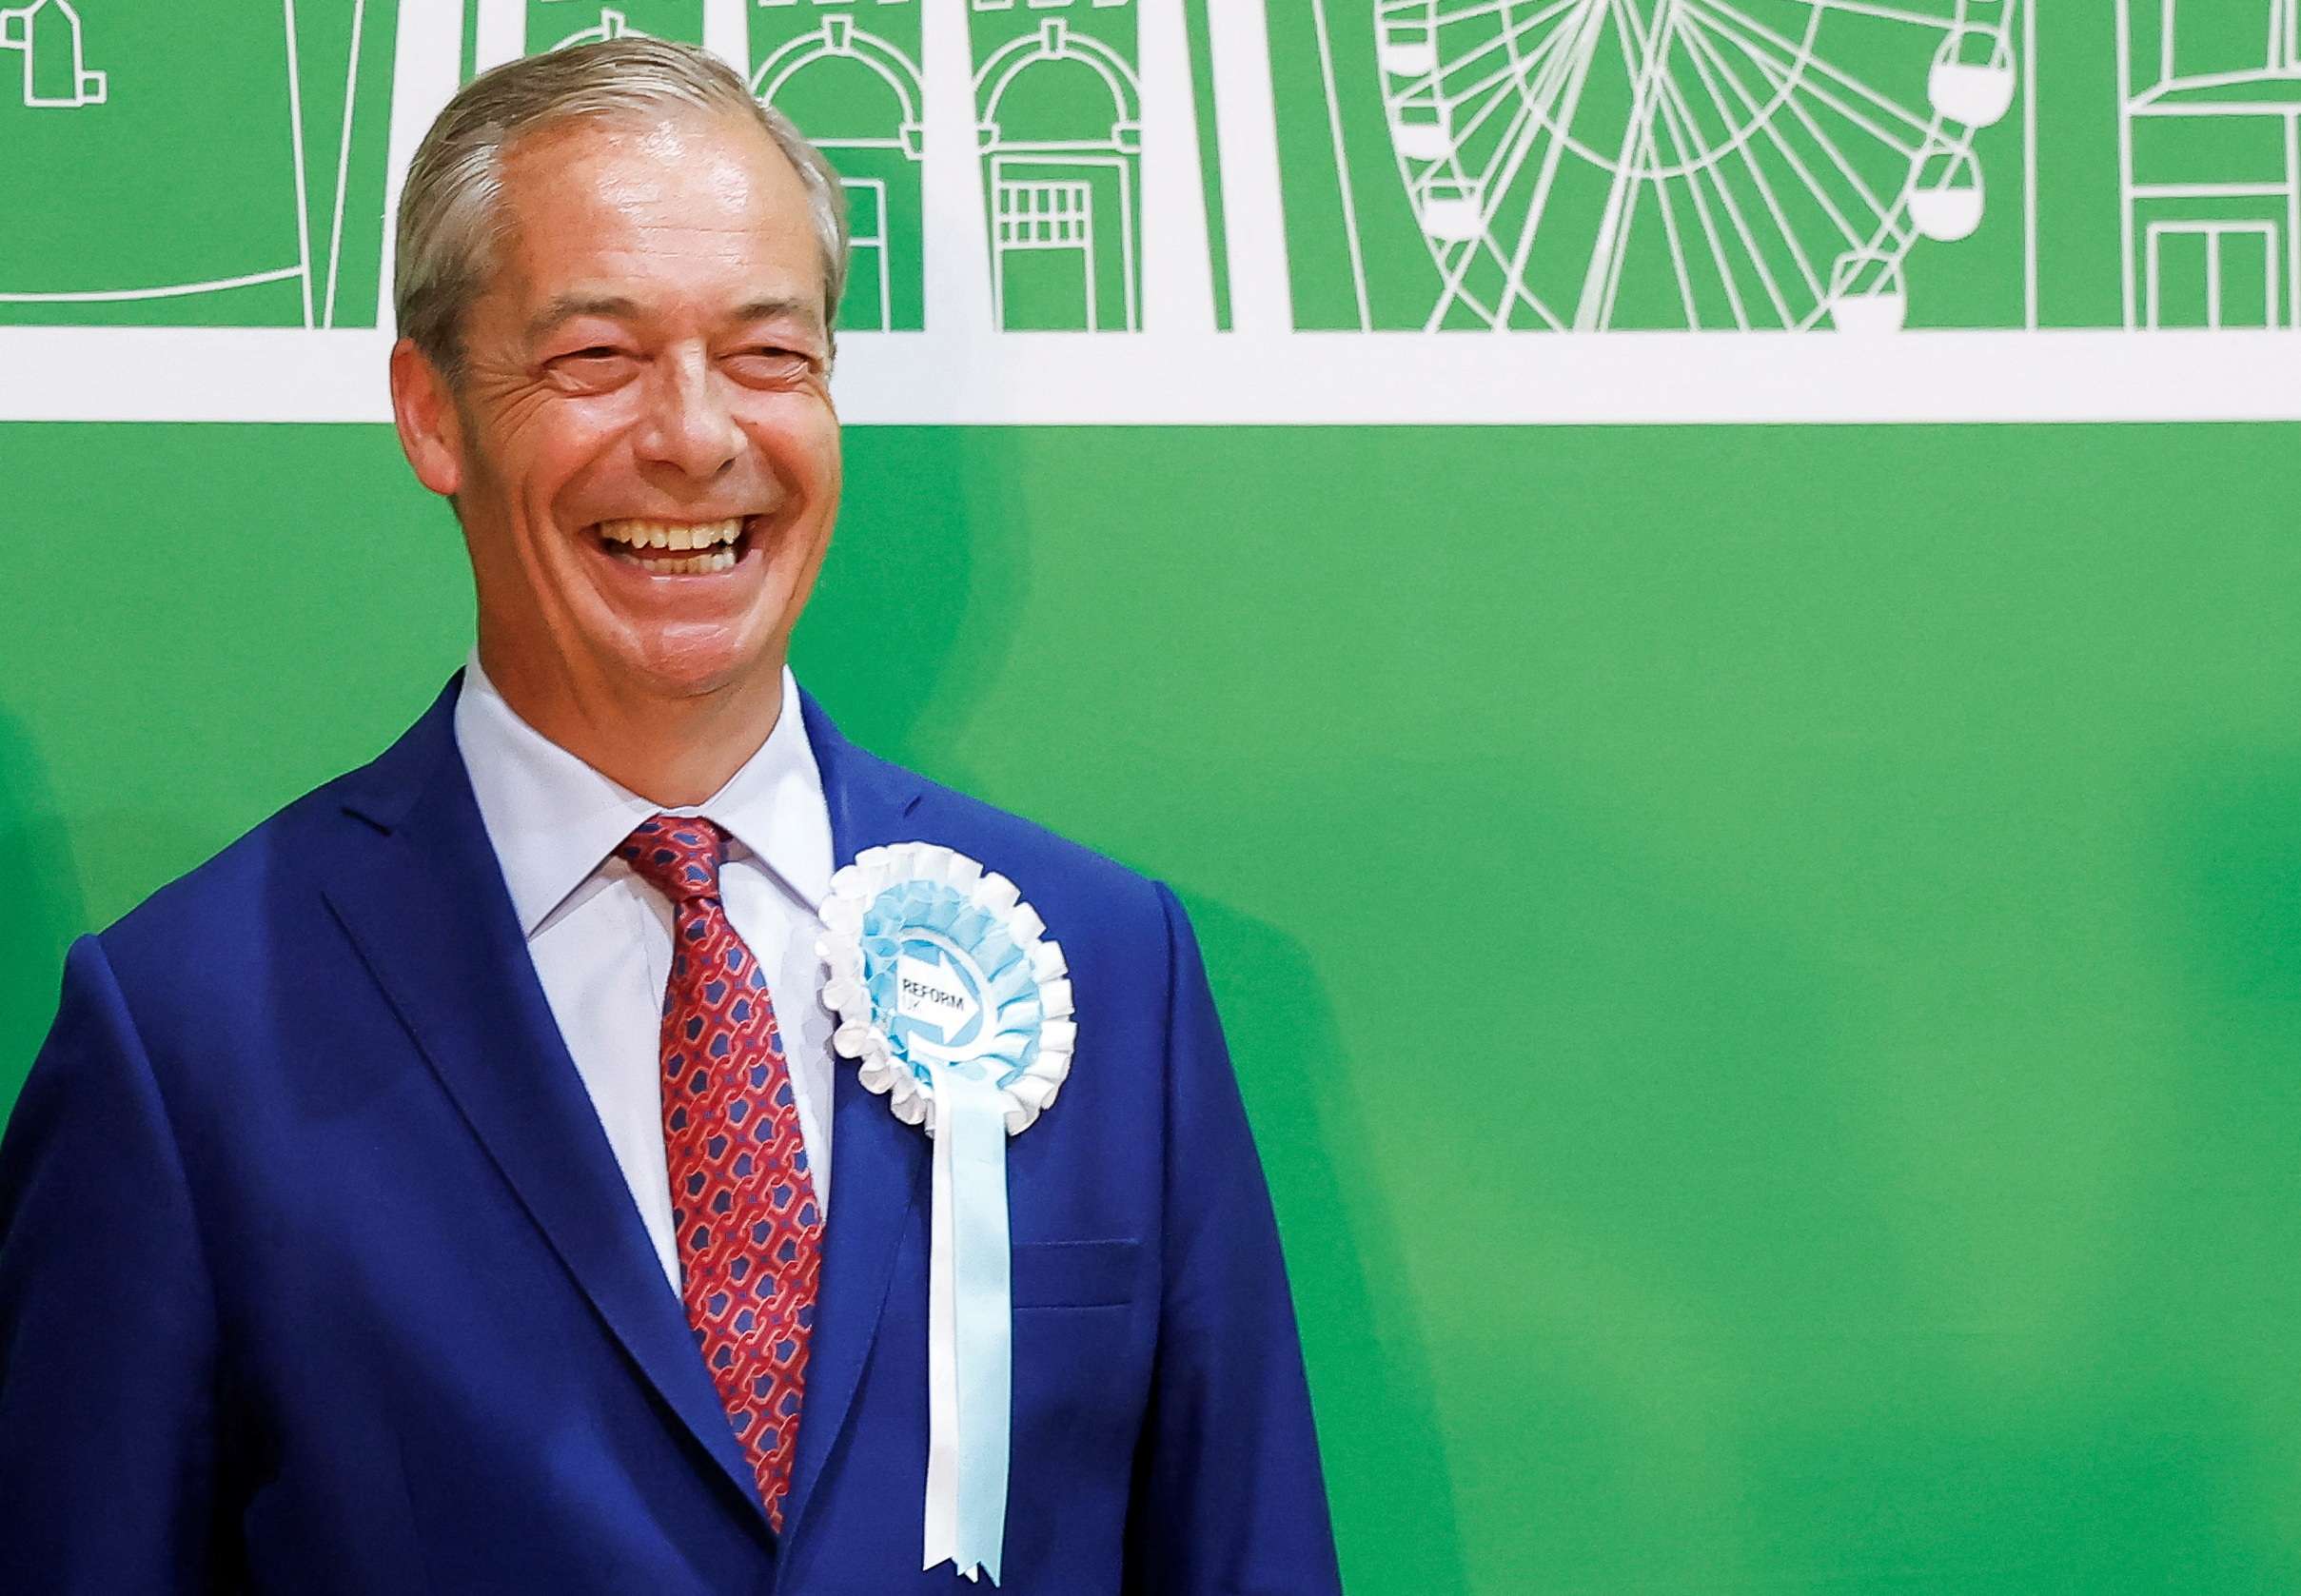 Farage vows to change politics forever after win